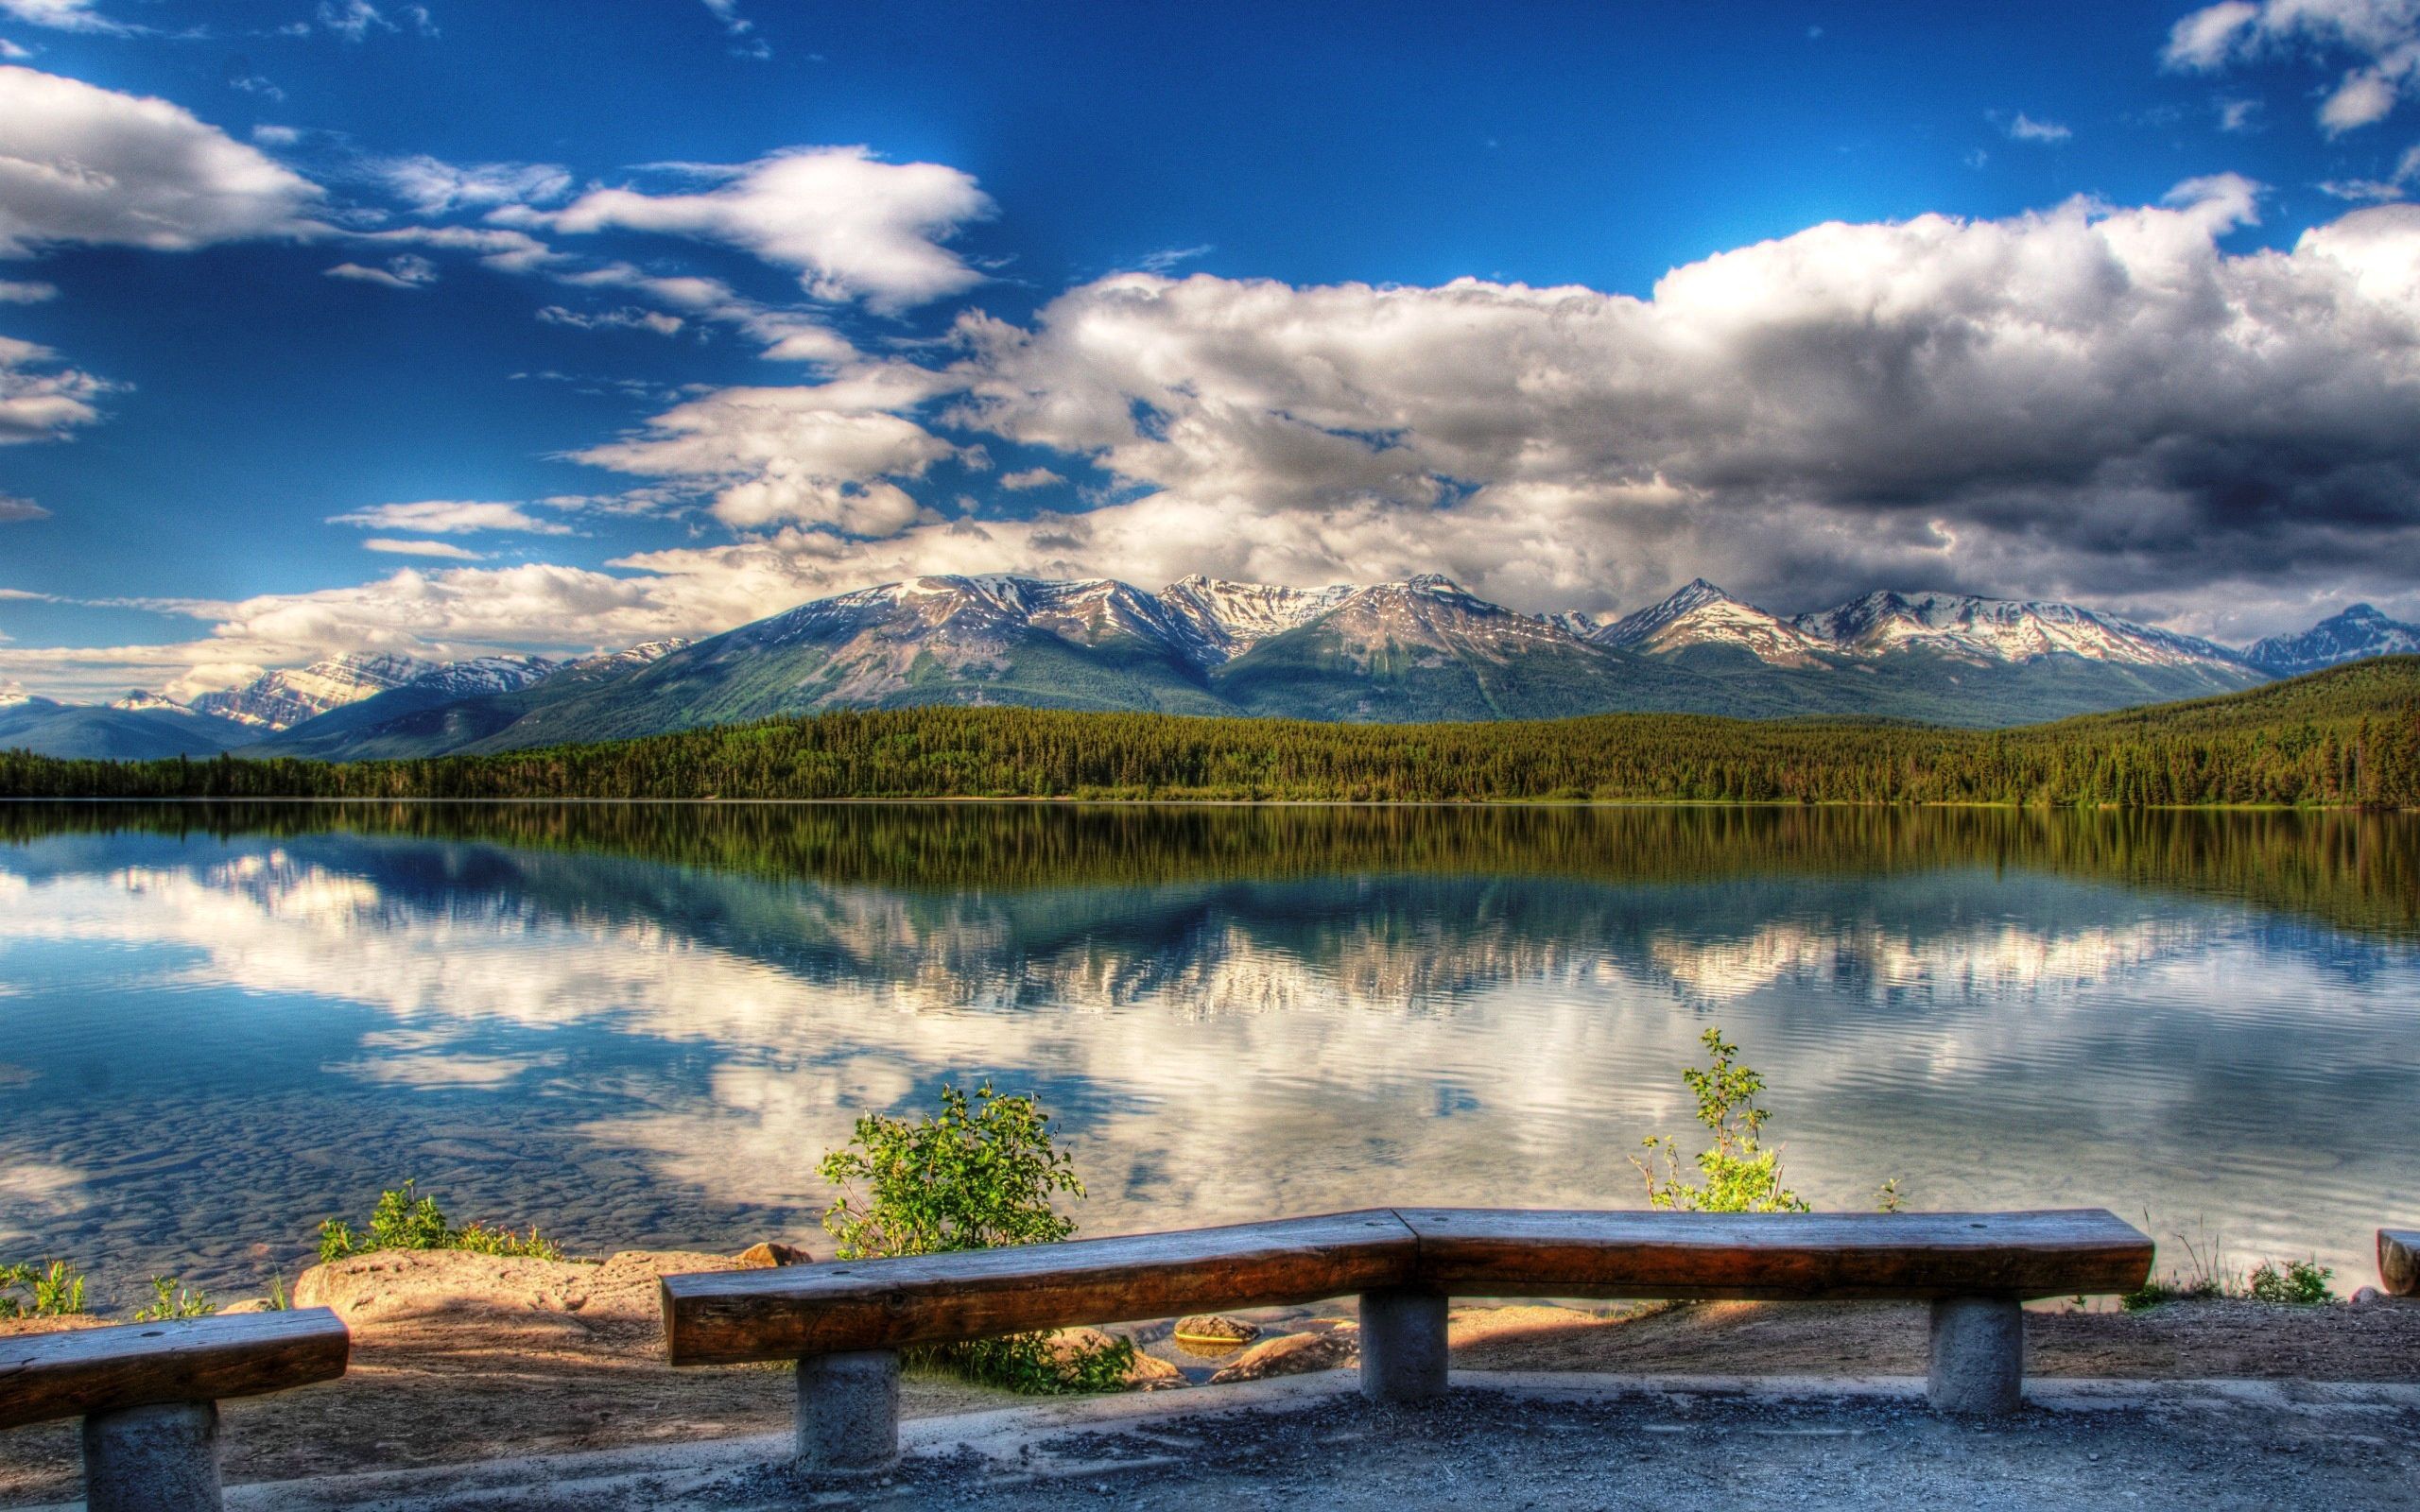 landscape, nature, sky, mountains, clouds, lake, reflection, shore, bank, day, benches, clear, i see, picturesque